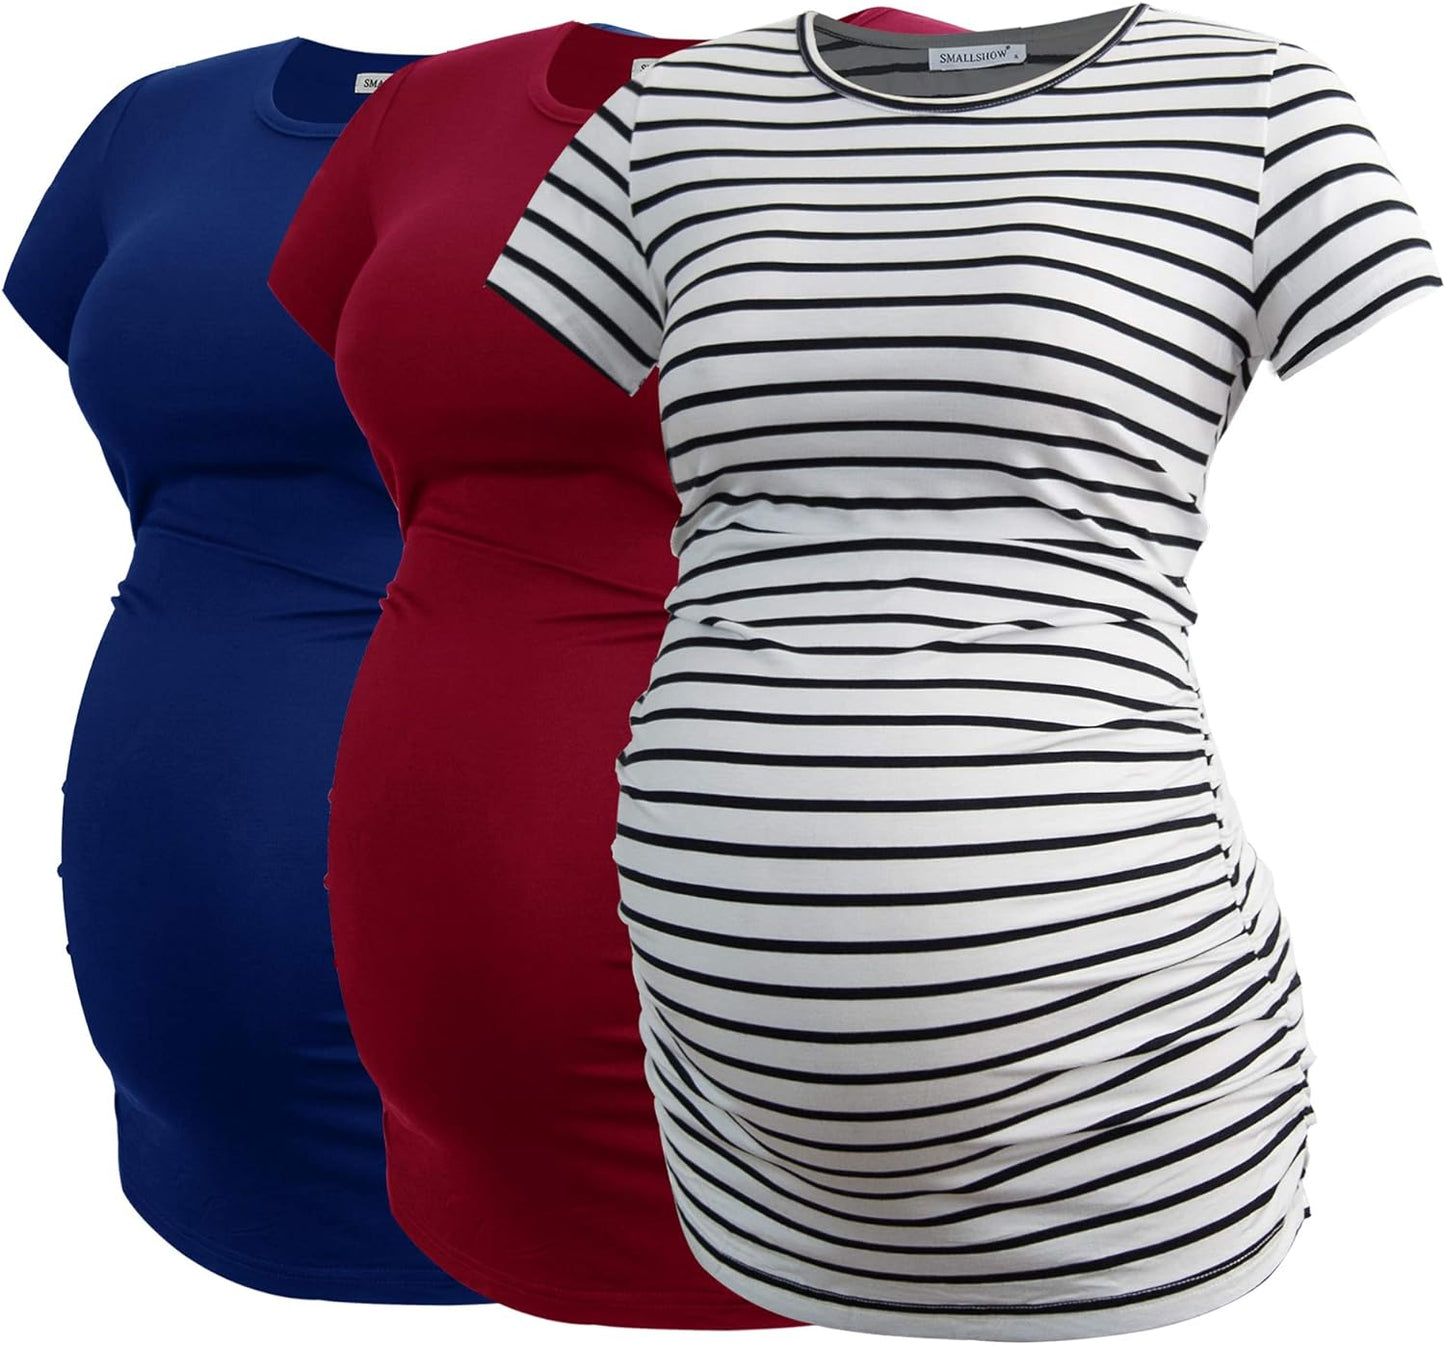 Smallshow Women's Maternity Tops Side Ruched Tunic T-Shirt Pregnancy Clothes